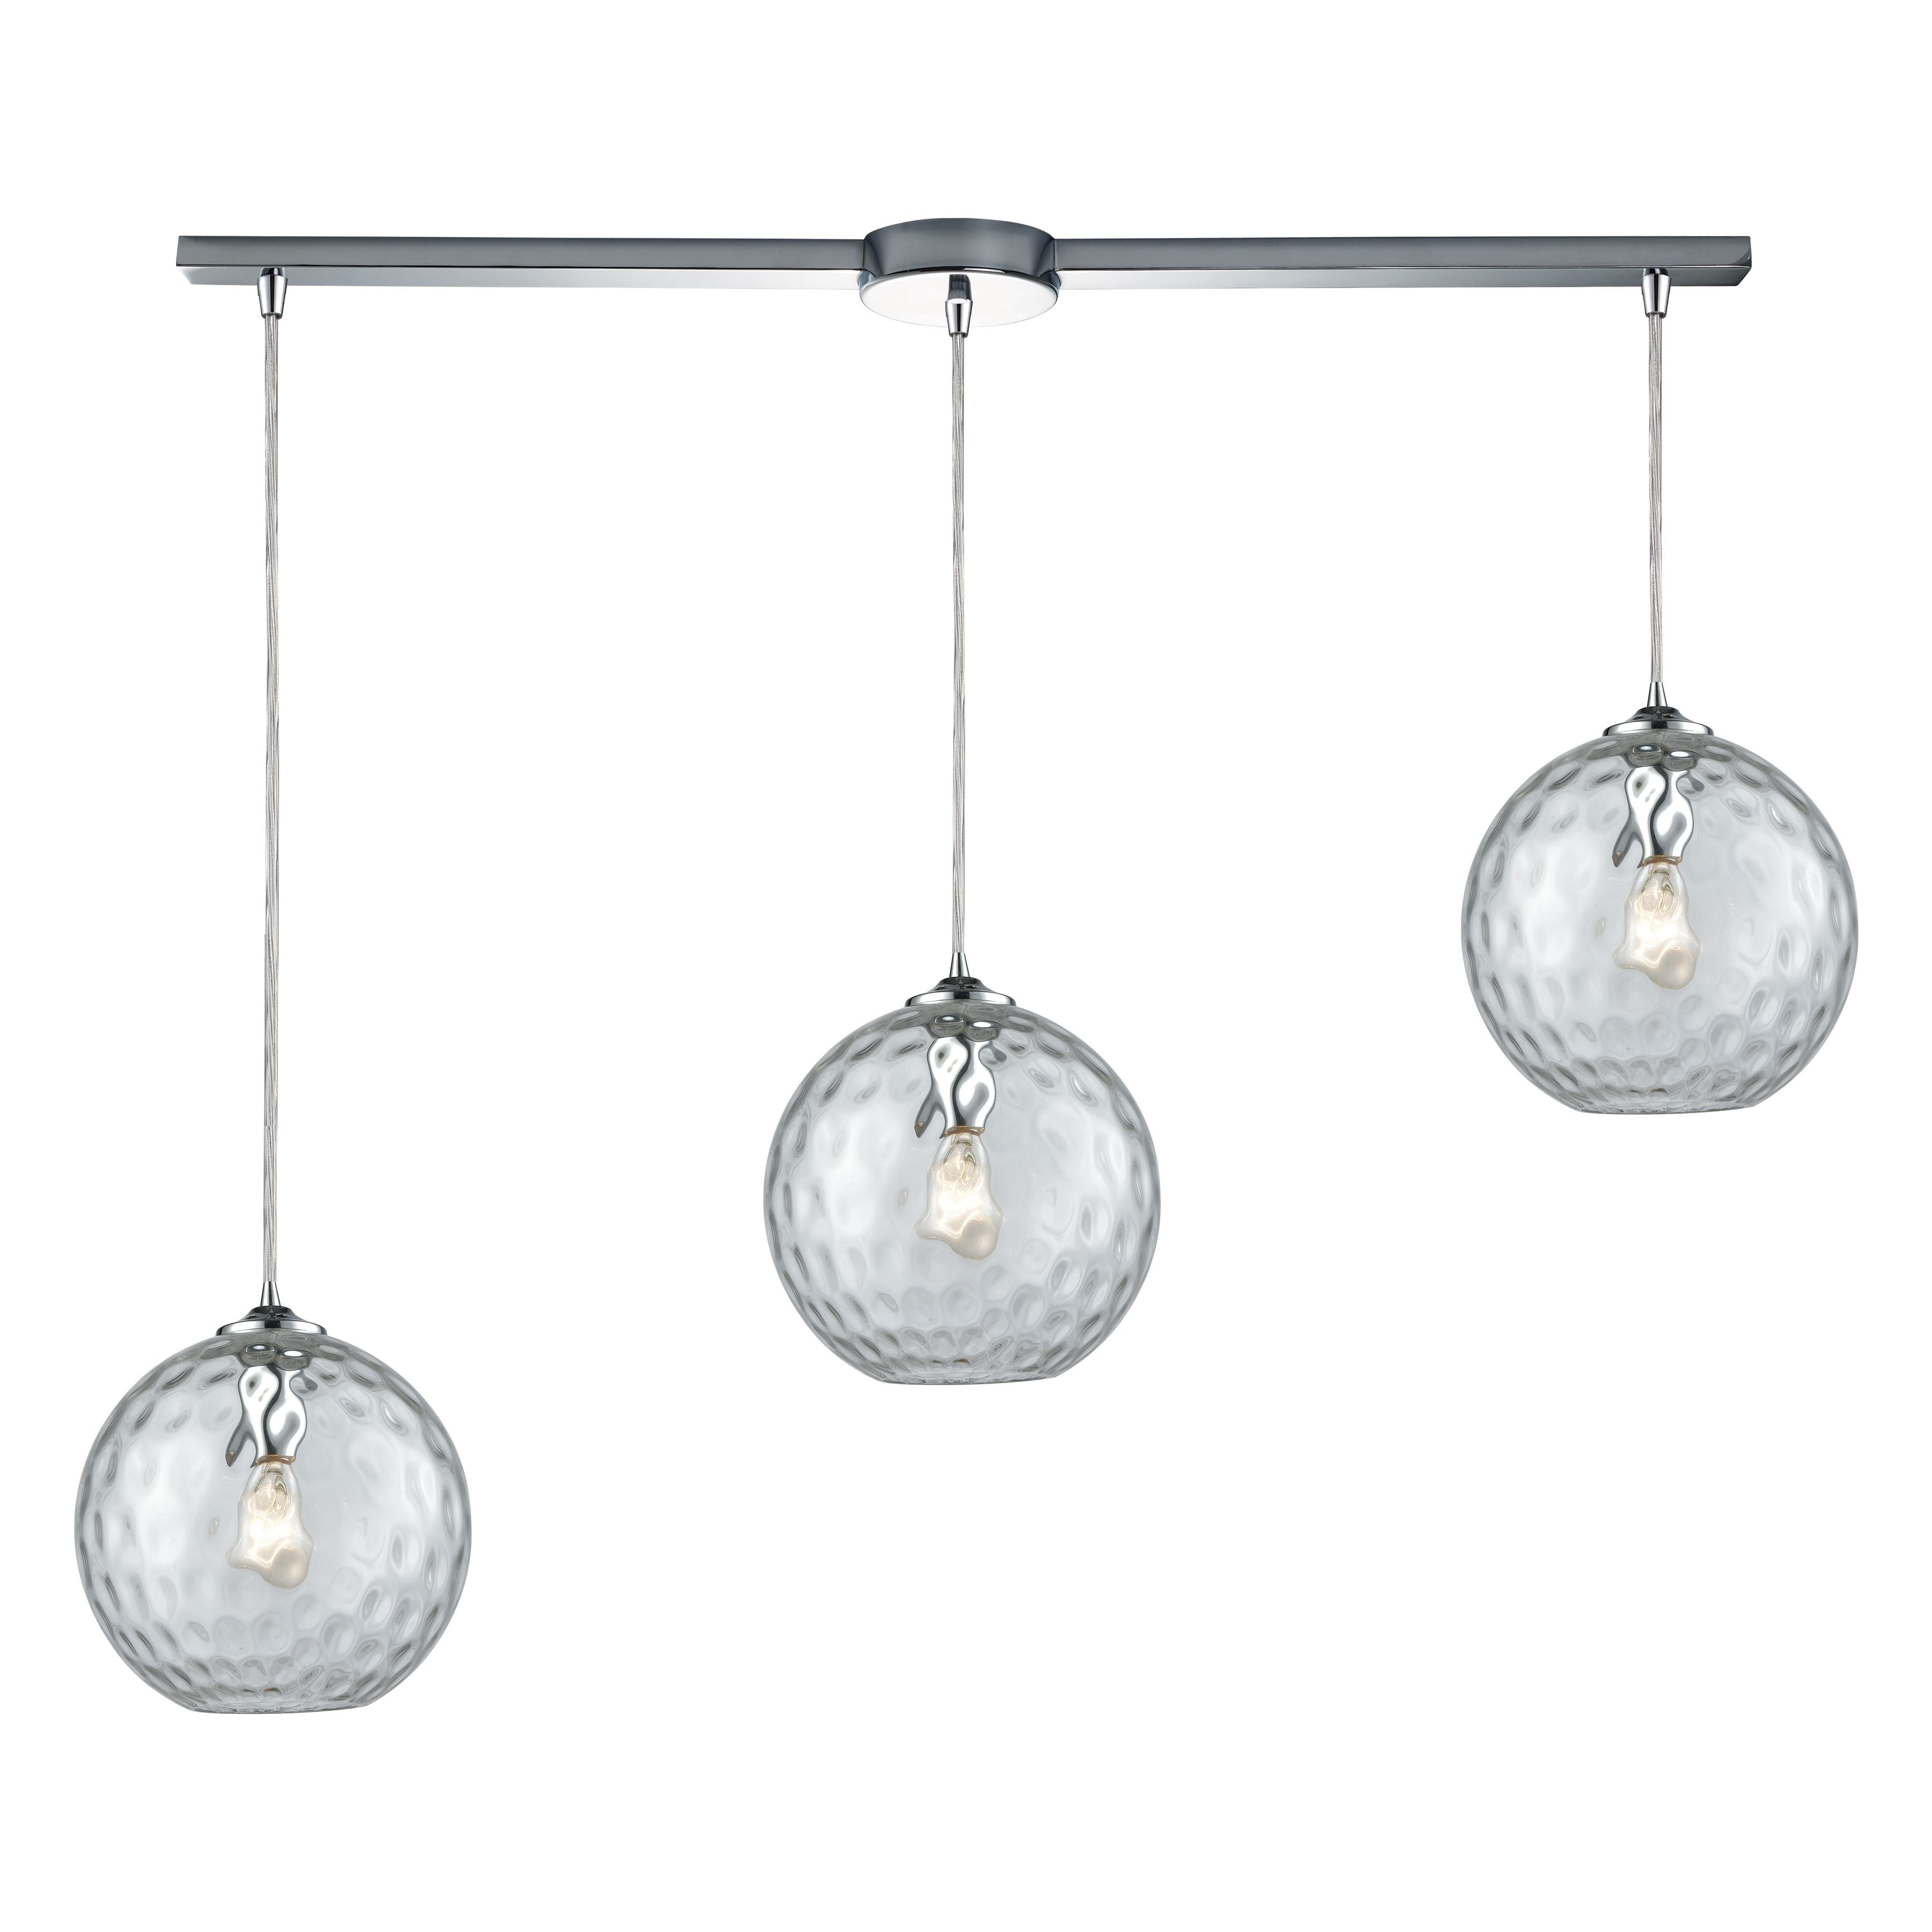 Elk Lighting Watersphere 36'' Wide 3-Light Slim Pendant - Polished Chrome with Clear